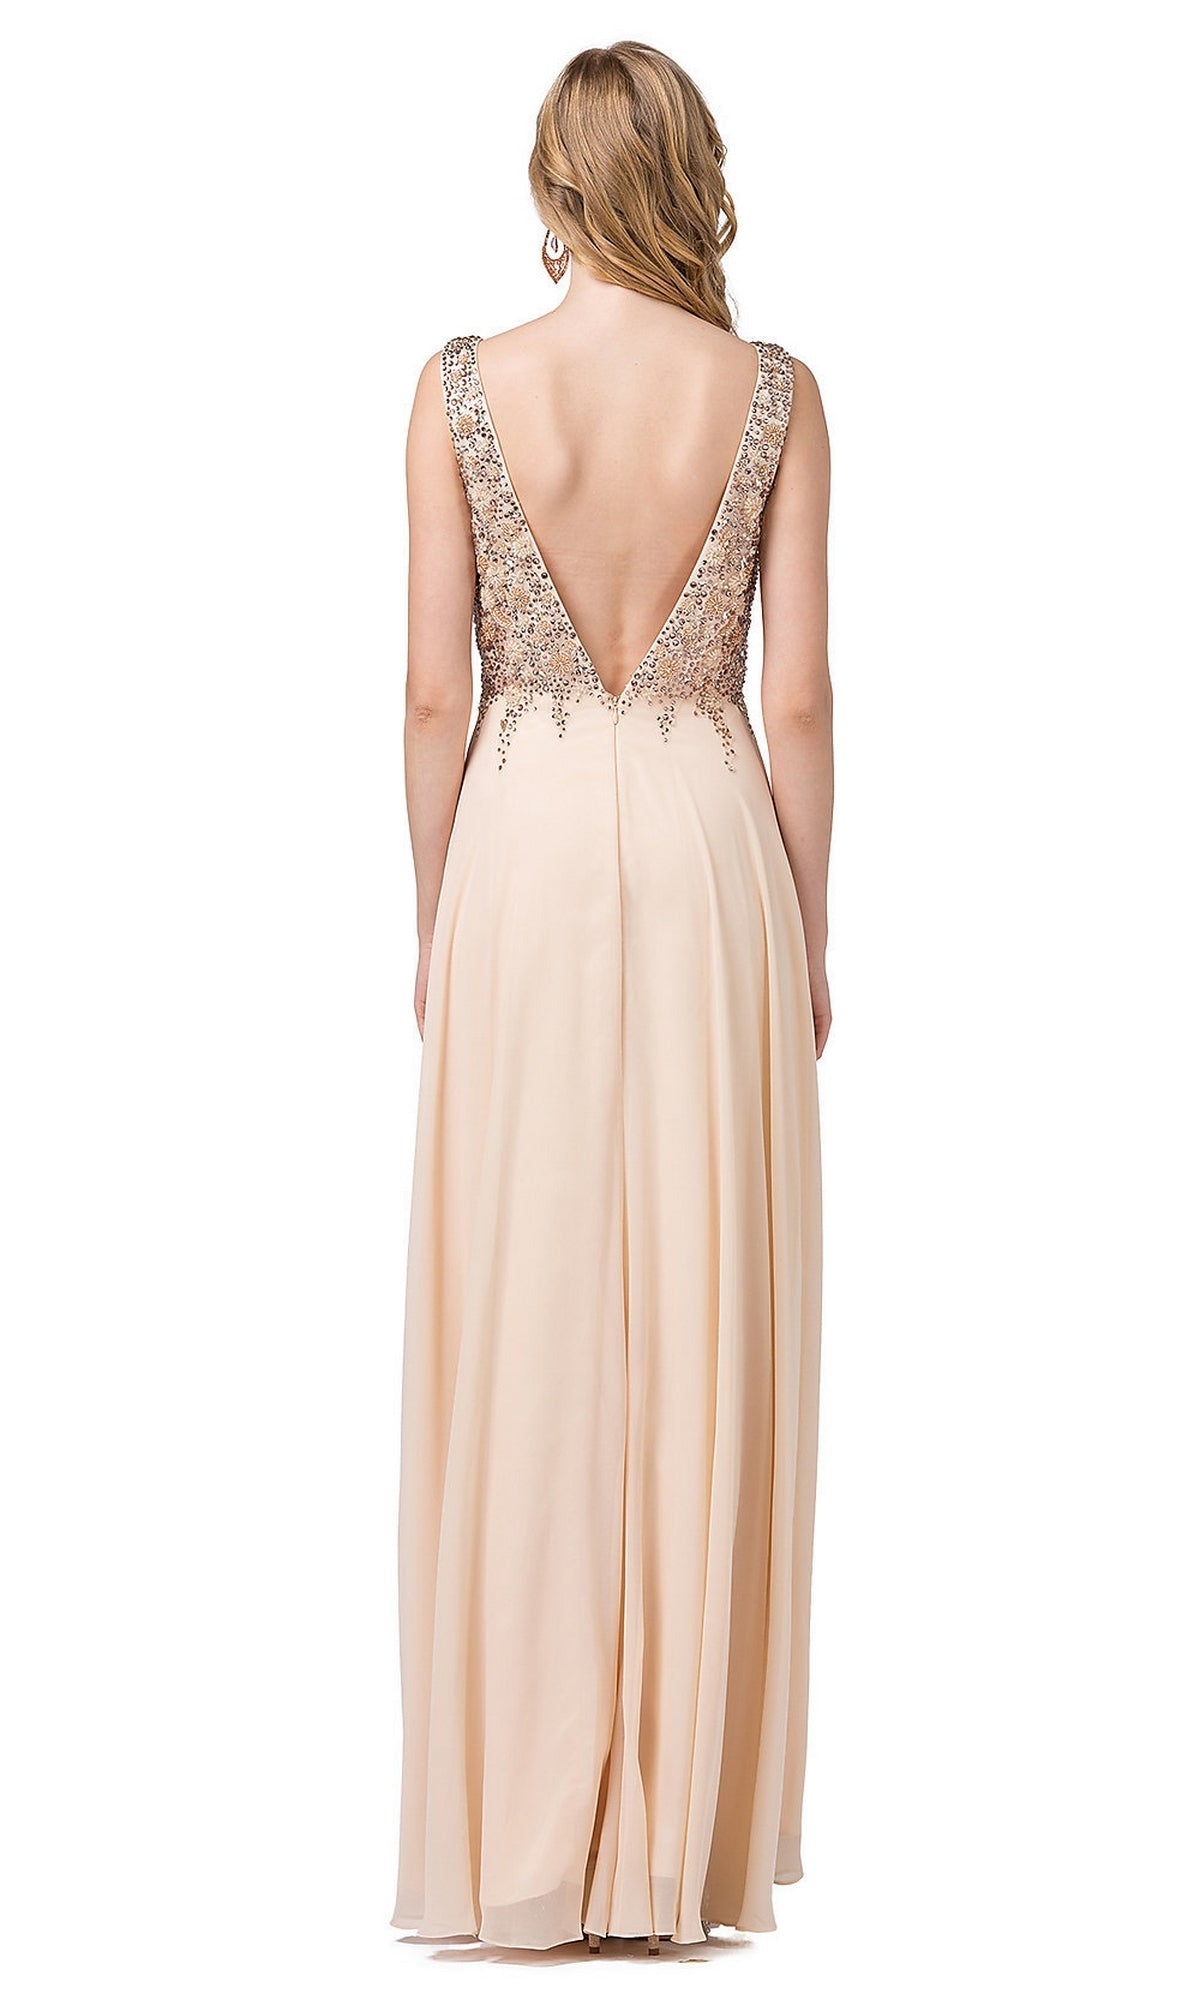  Backless Chiffon Formal Dress with Beaded Bodice